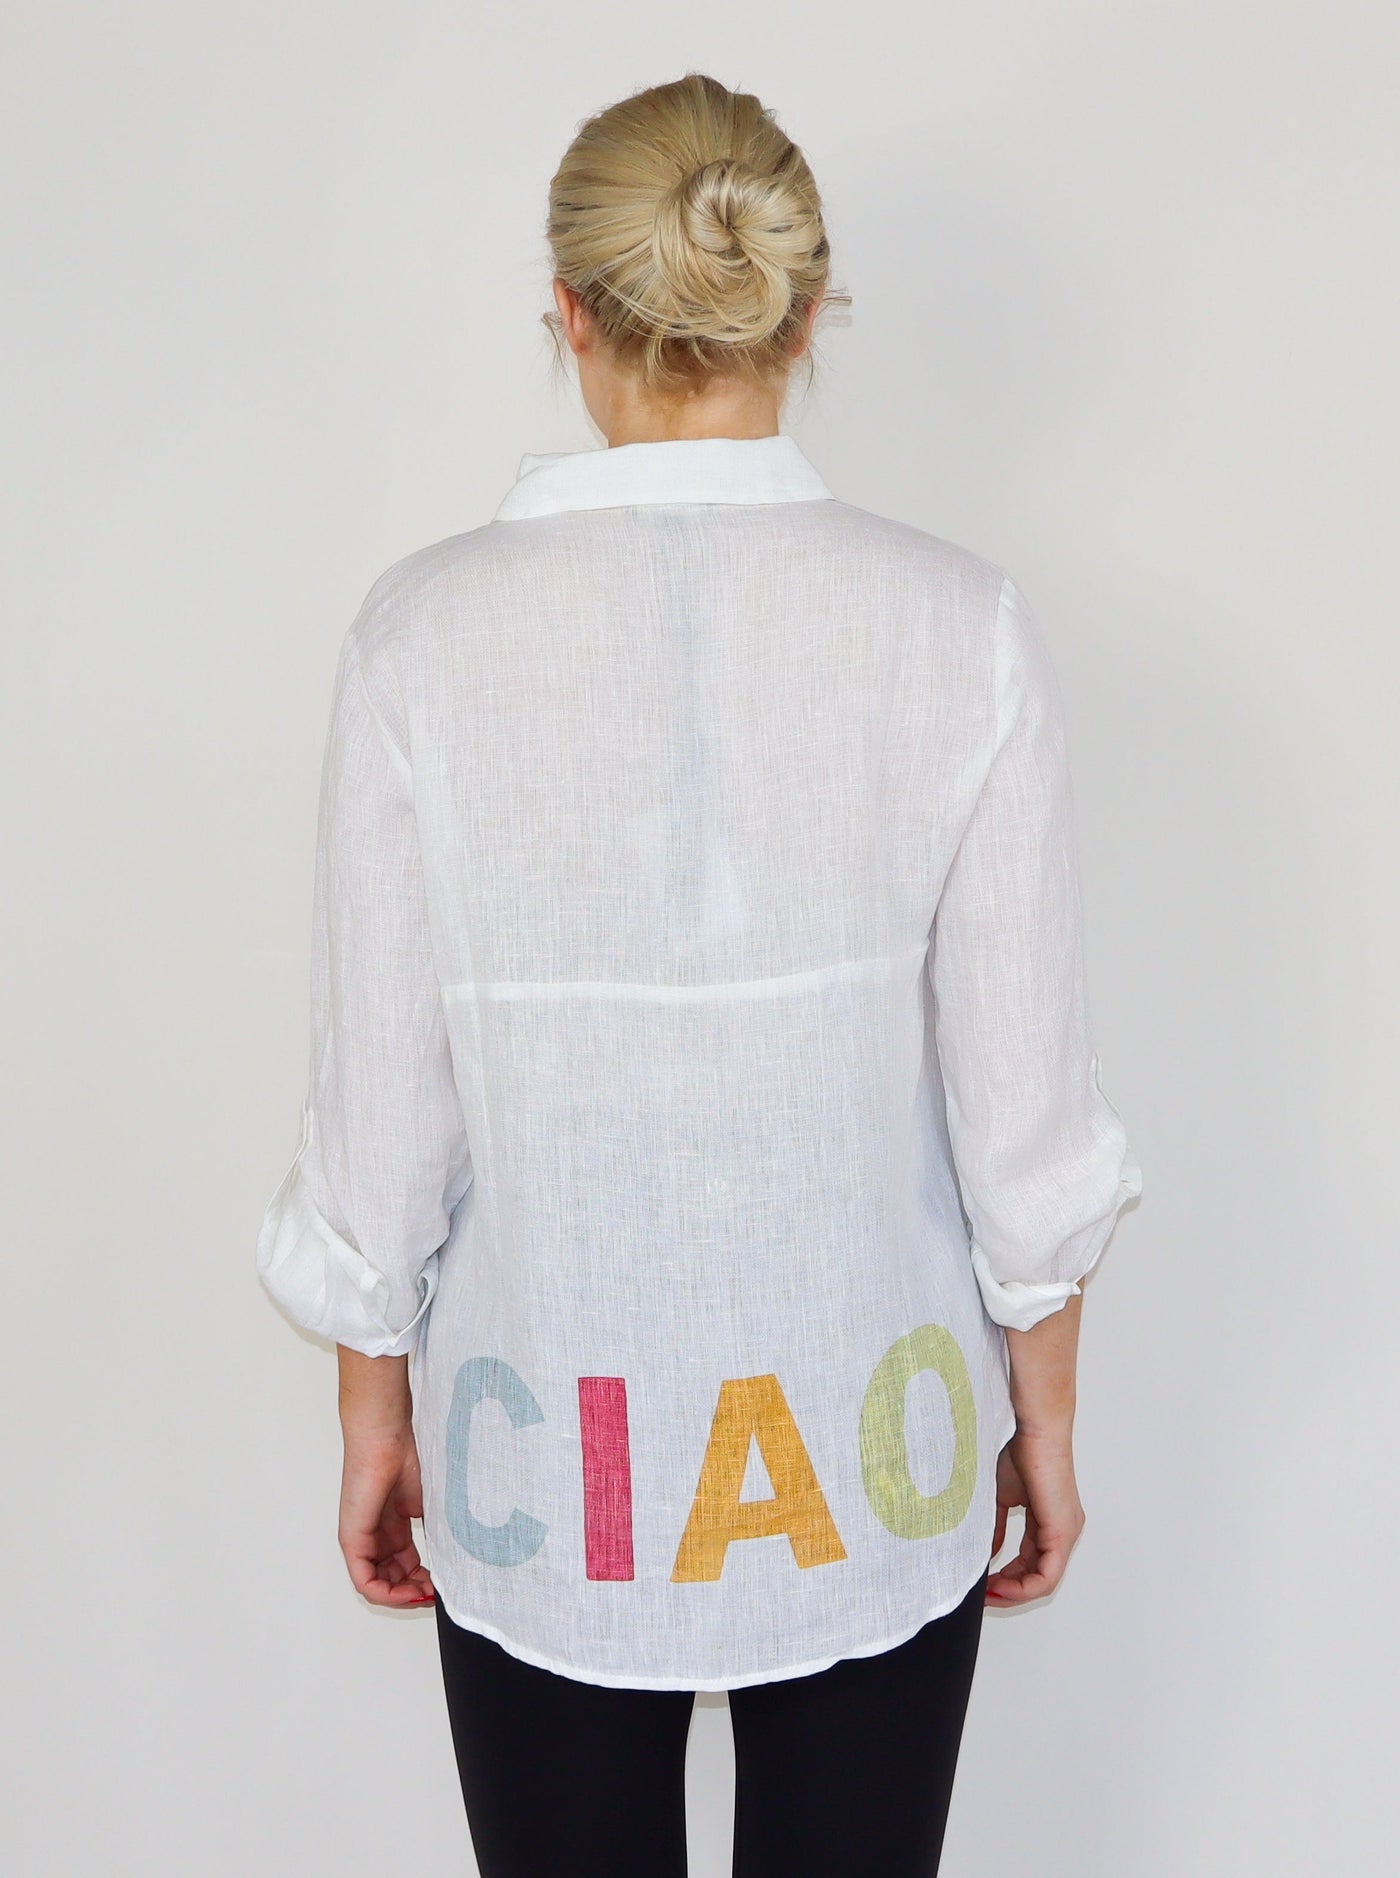 White linen button up with "Ciao" Printed on the backside.